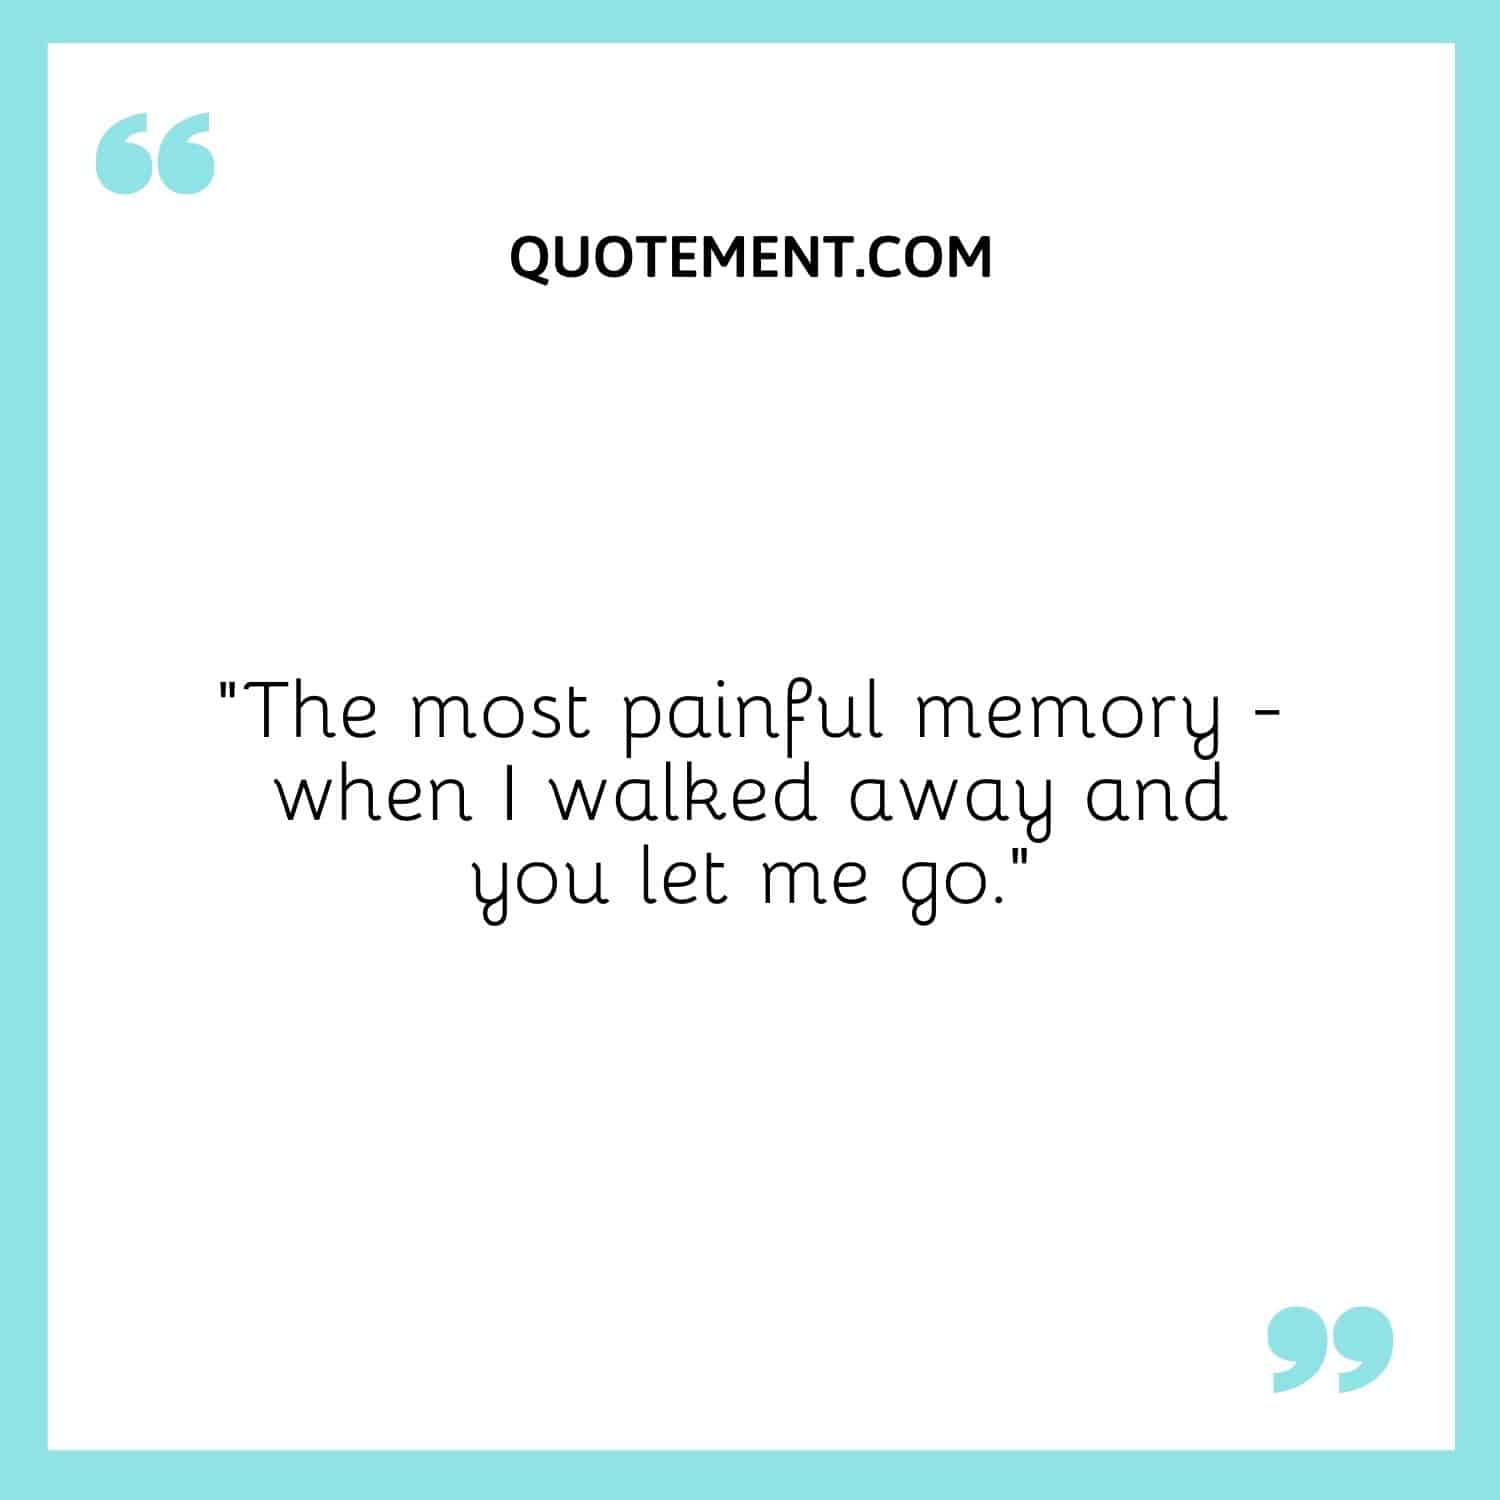 The most painful memory - when I walked away and you let me go